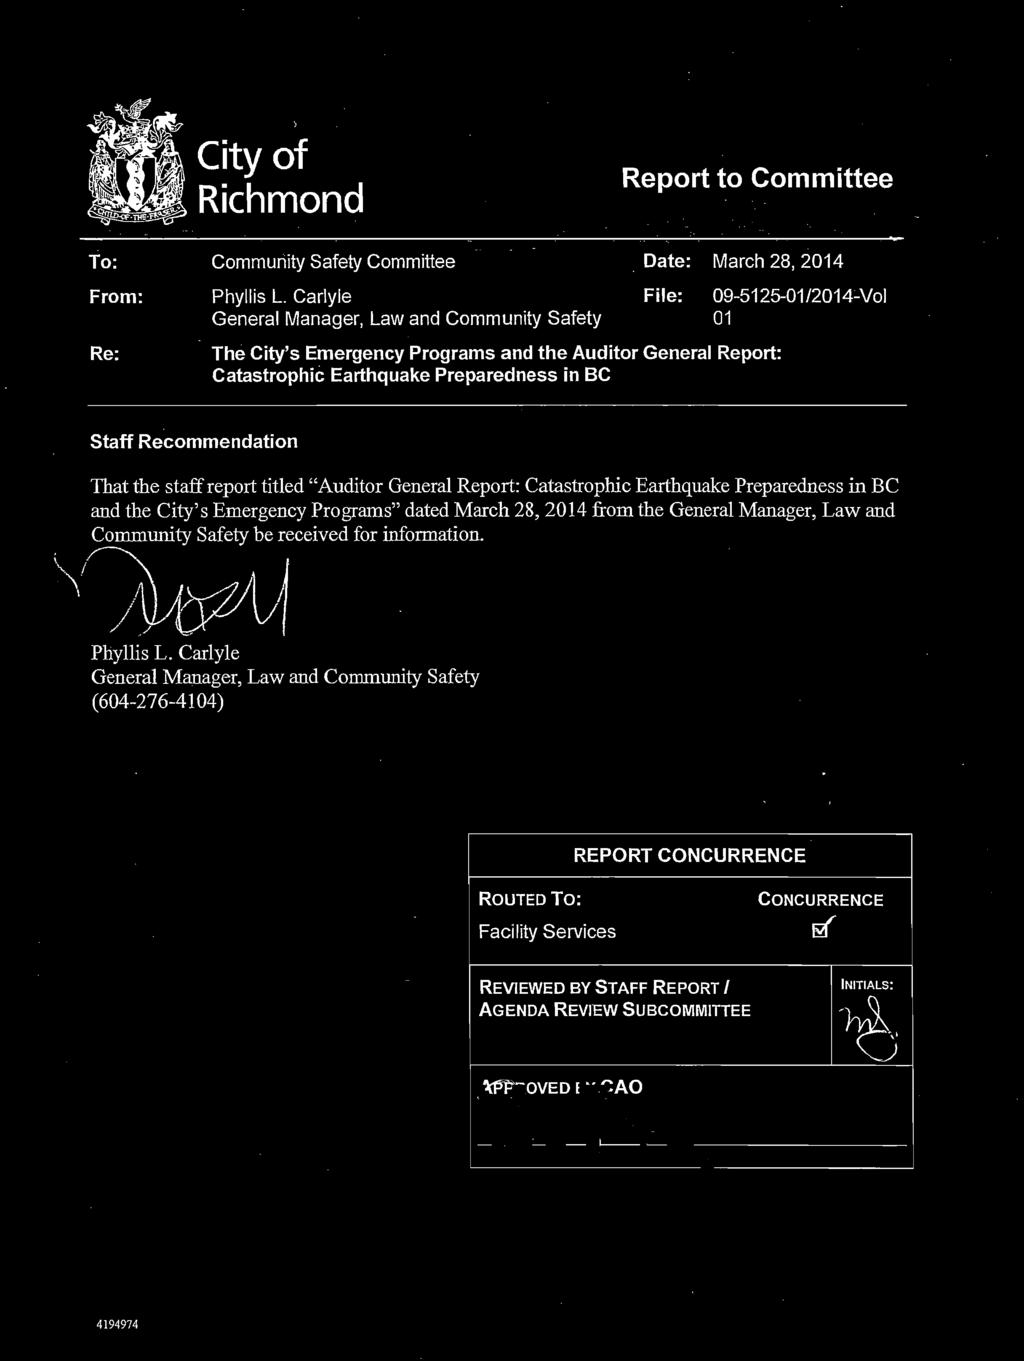 09-5125-01/2014:"Vol 01 Staff Recommendation That the staff report titled "Auditor General Report: Catastrophic Earthquake Preparedness in BC and the City's Emergency Programs" dated